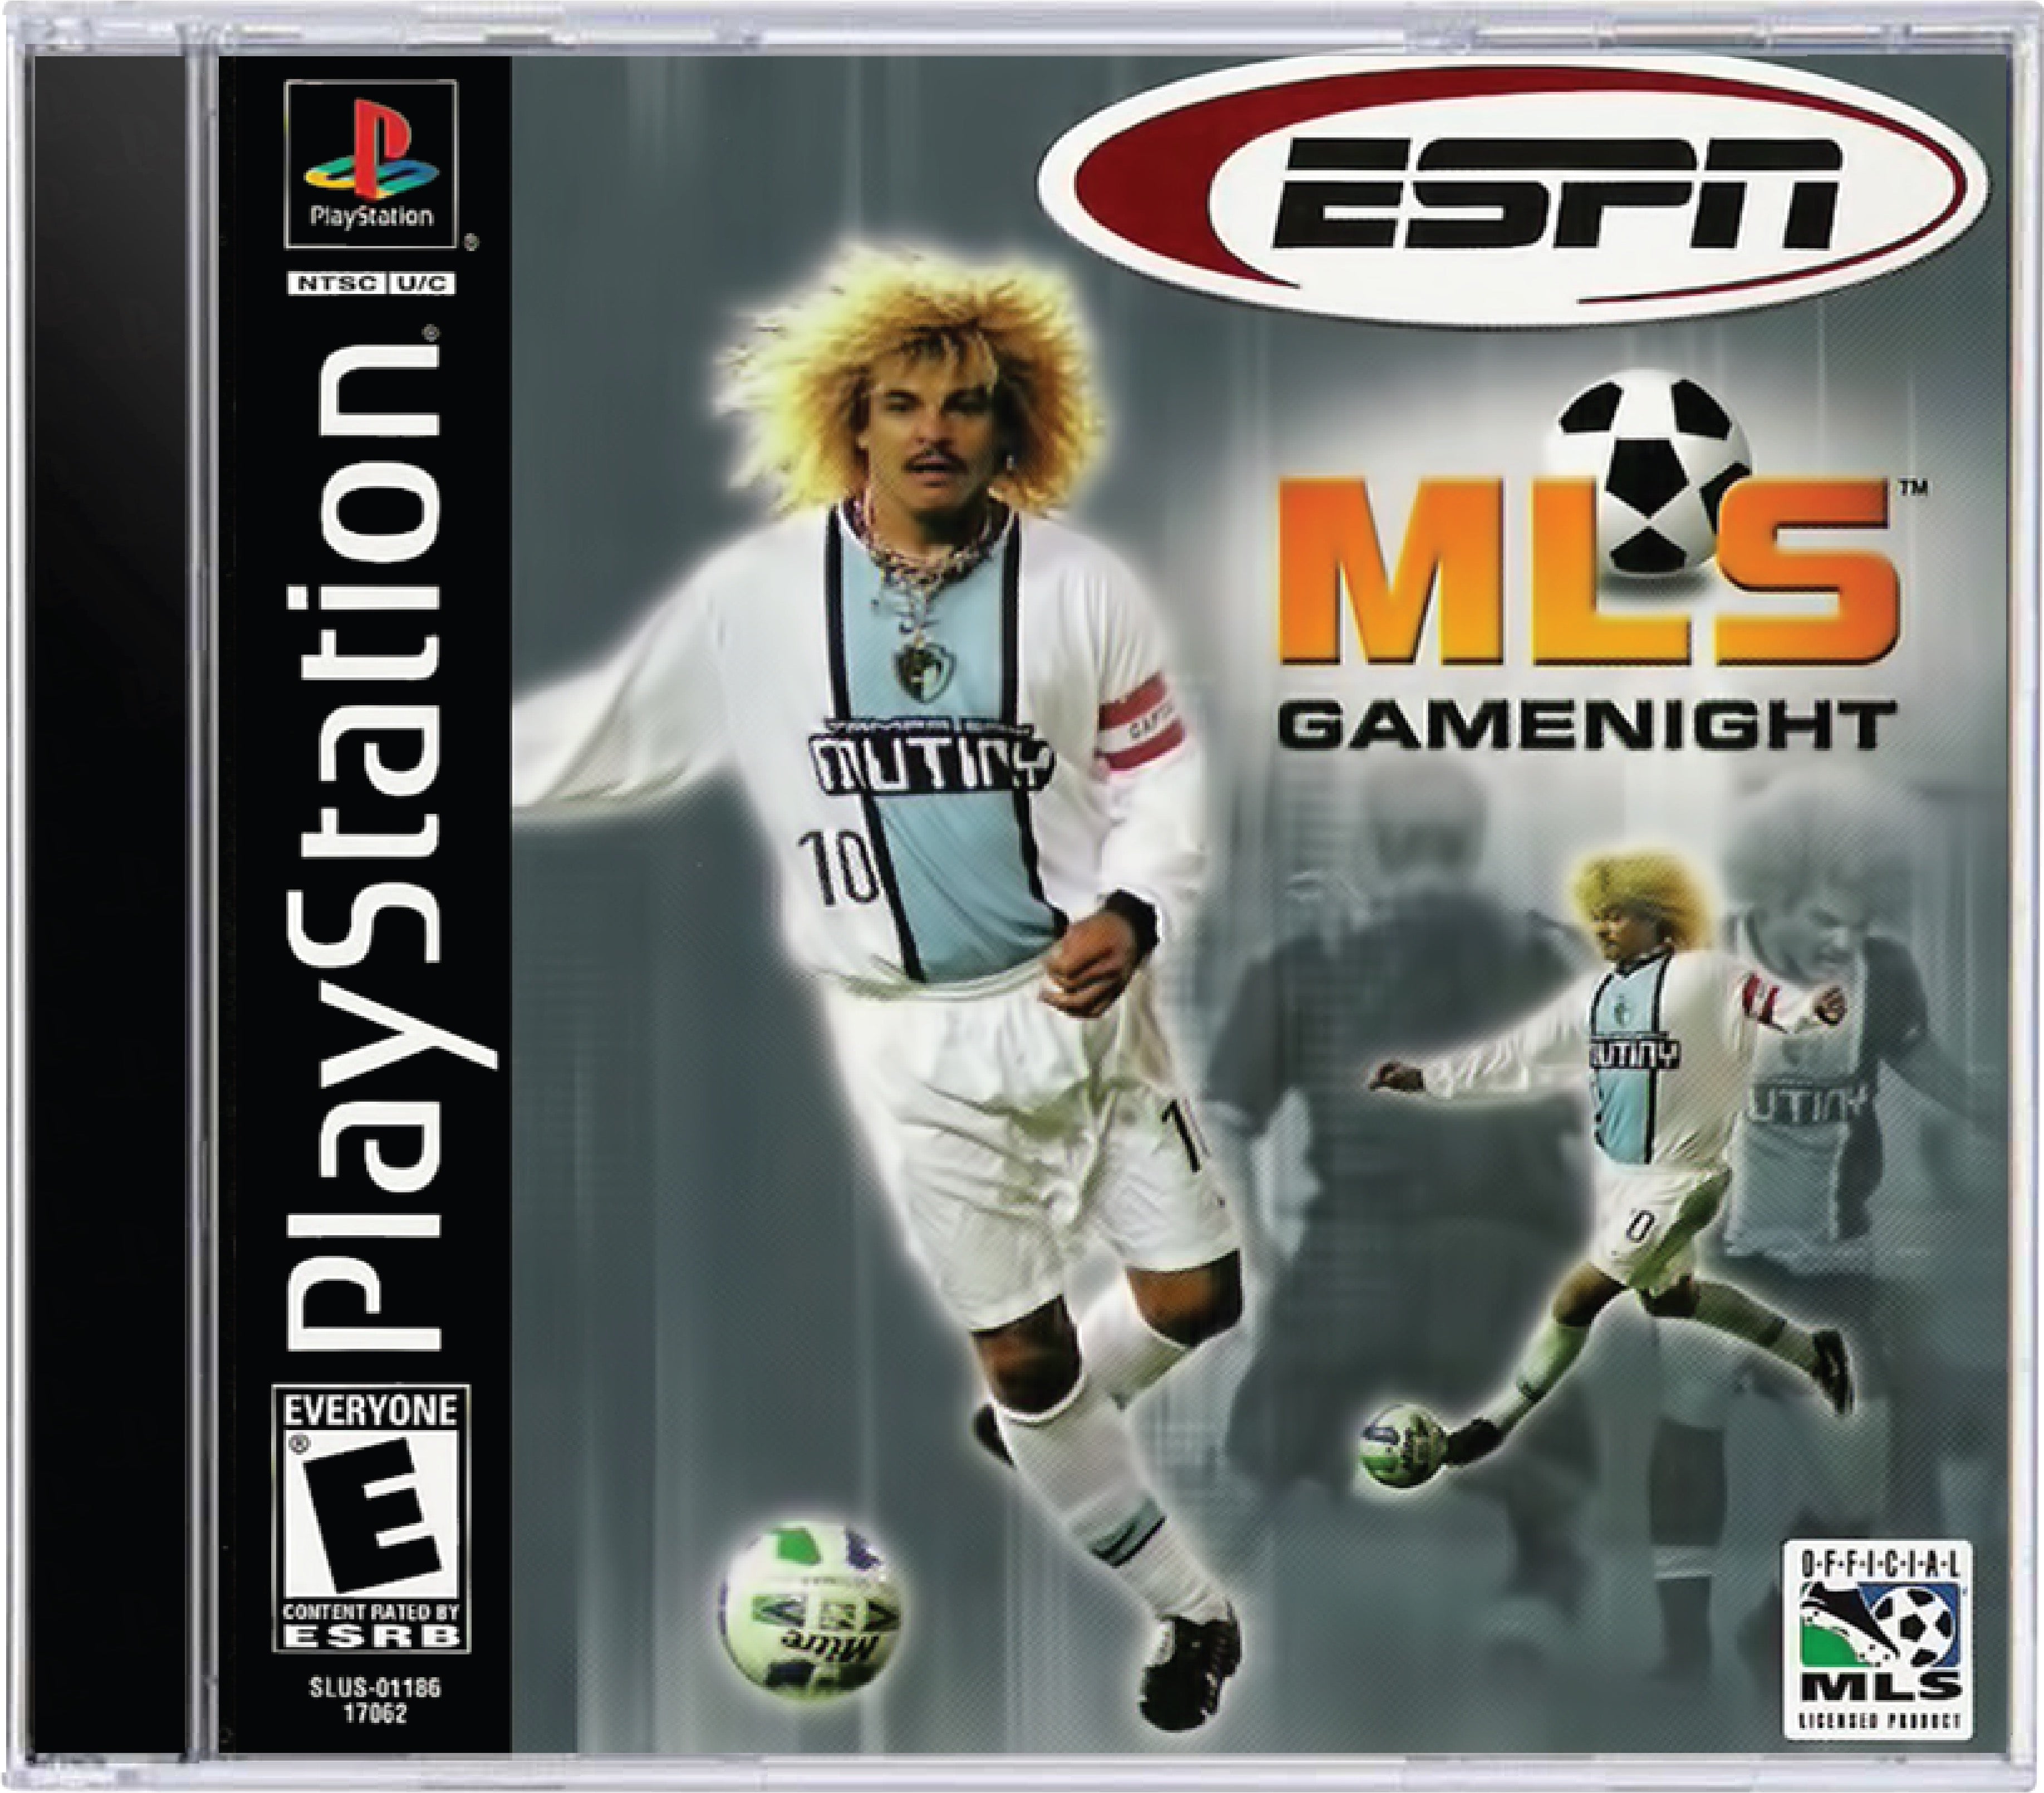 ESPN MLS GameNight Cover Art and Product Photo